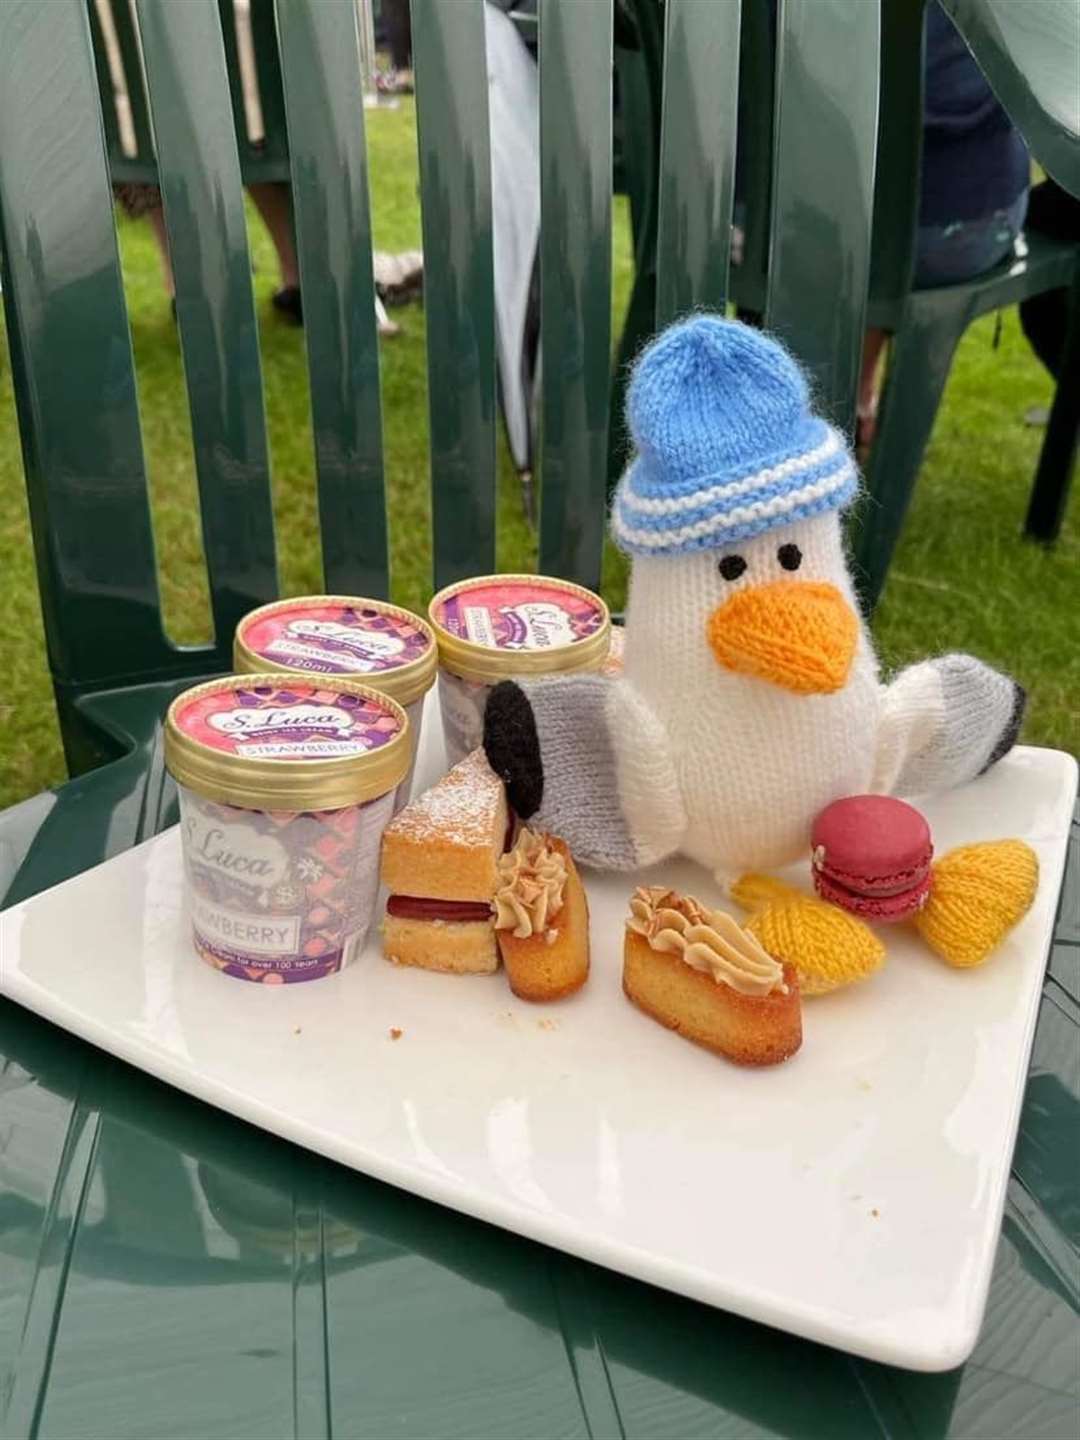 Buckie's Roots' wandering knitted seagull Steven Seagull had the royal garden party at Holyrood on his itinerary. Picture: Buckie's Roots